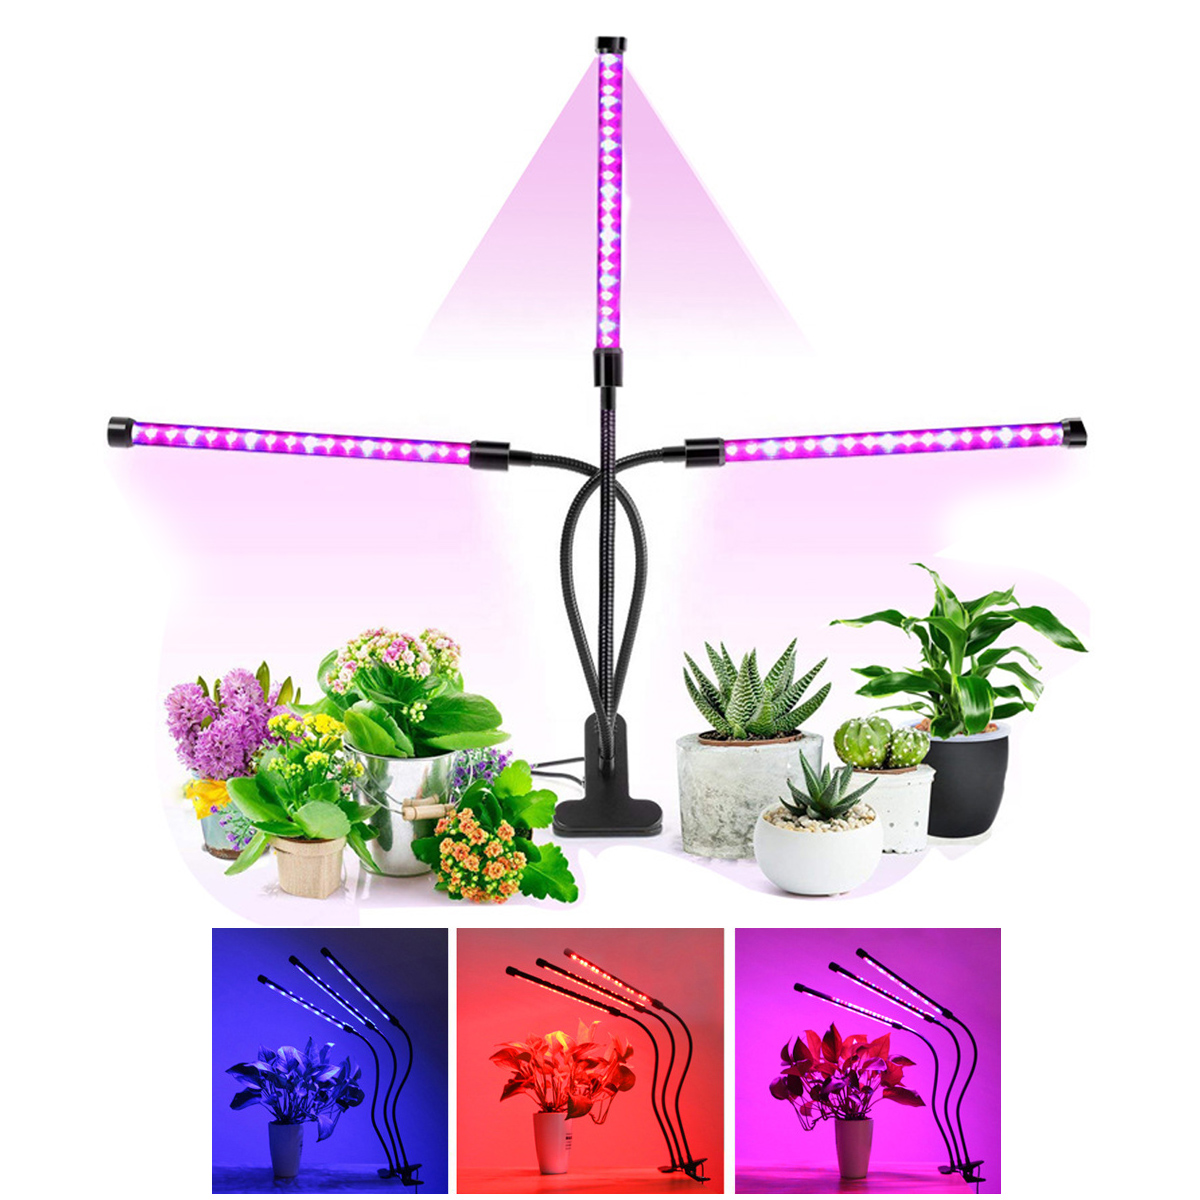 1234-Head-LED-Grow-Light-Plant-Growing-Lamp-Lights-with-Clip-for-Indoor-Plants-1836989-9